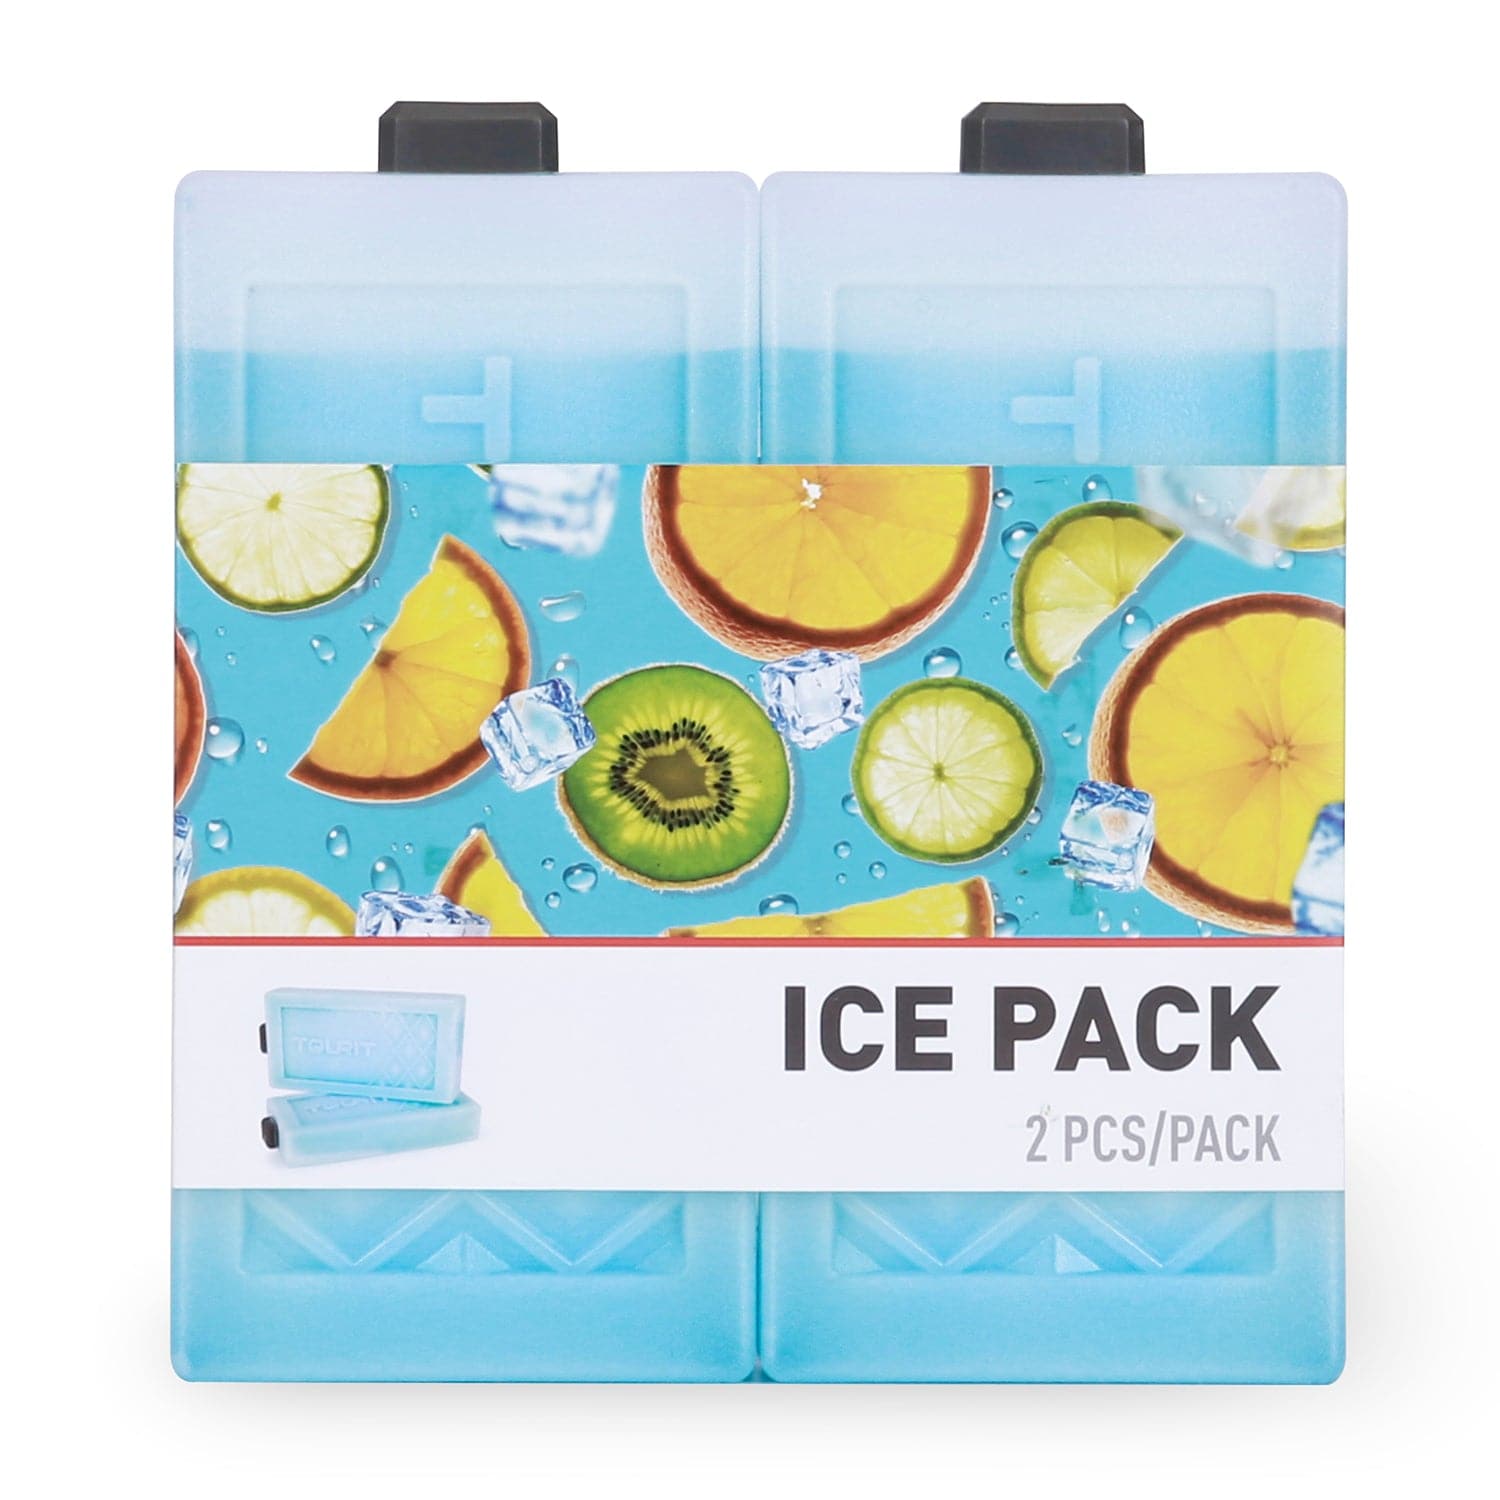  TOURIT Reusable Ice Pack for Lunch Box, Lunch Bags and  Coolers, Super Cute Kids Ice Packs, Slim and Long Lasting Freezer Packs,  BPA Free, Set of 2 : Sports & Outdoors